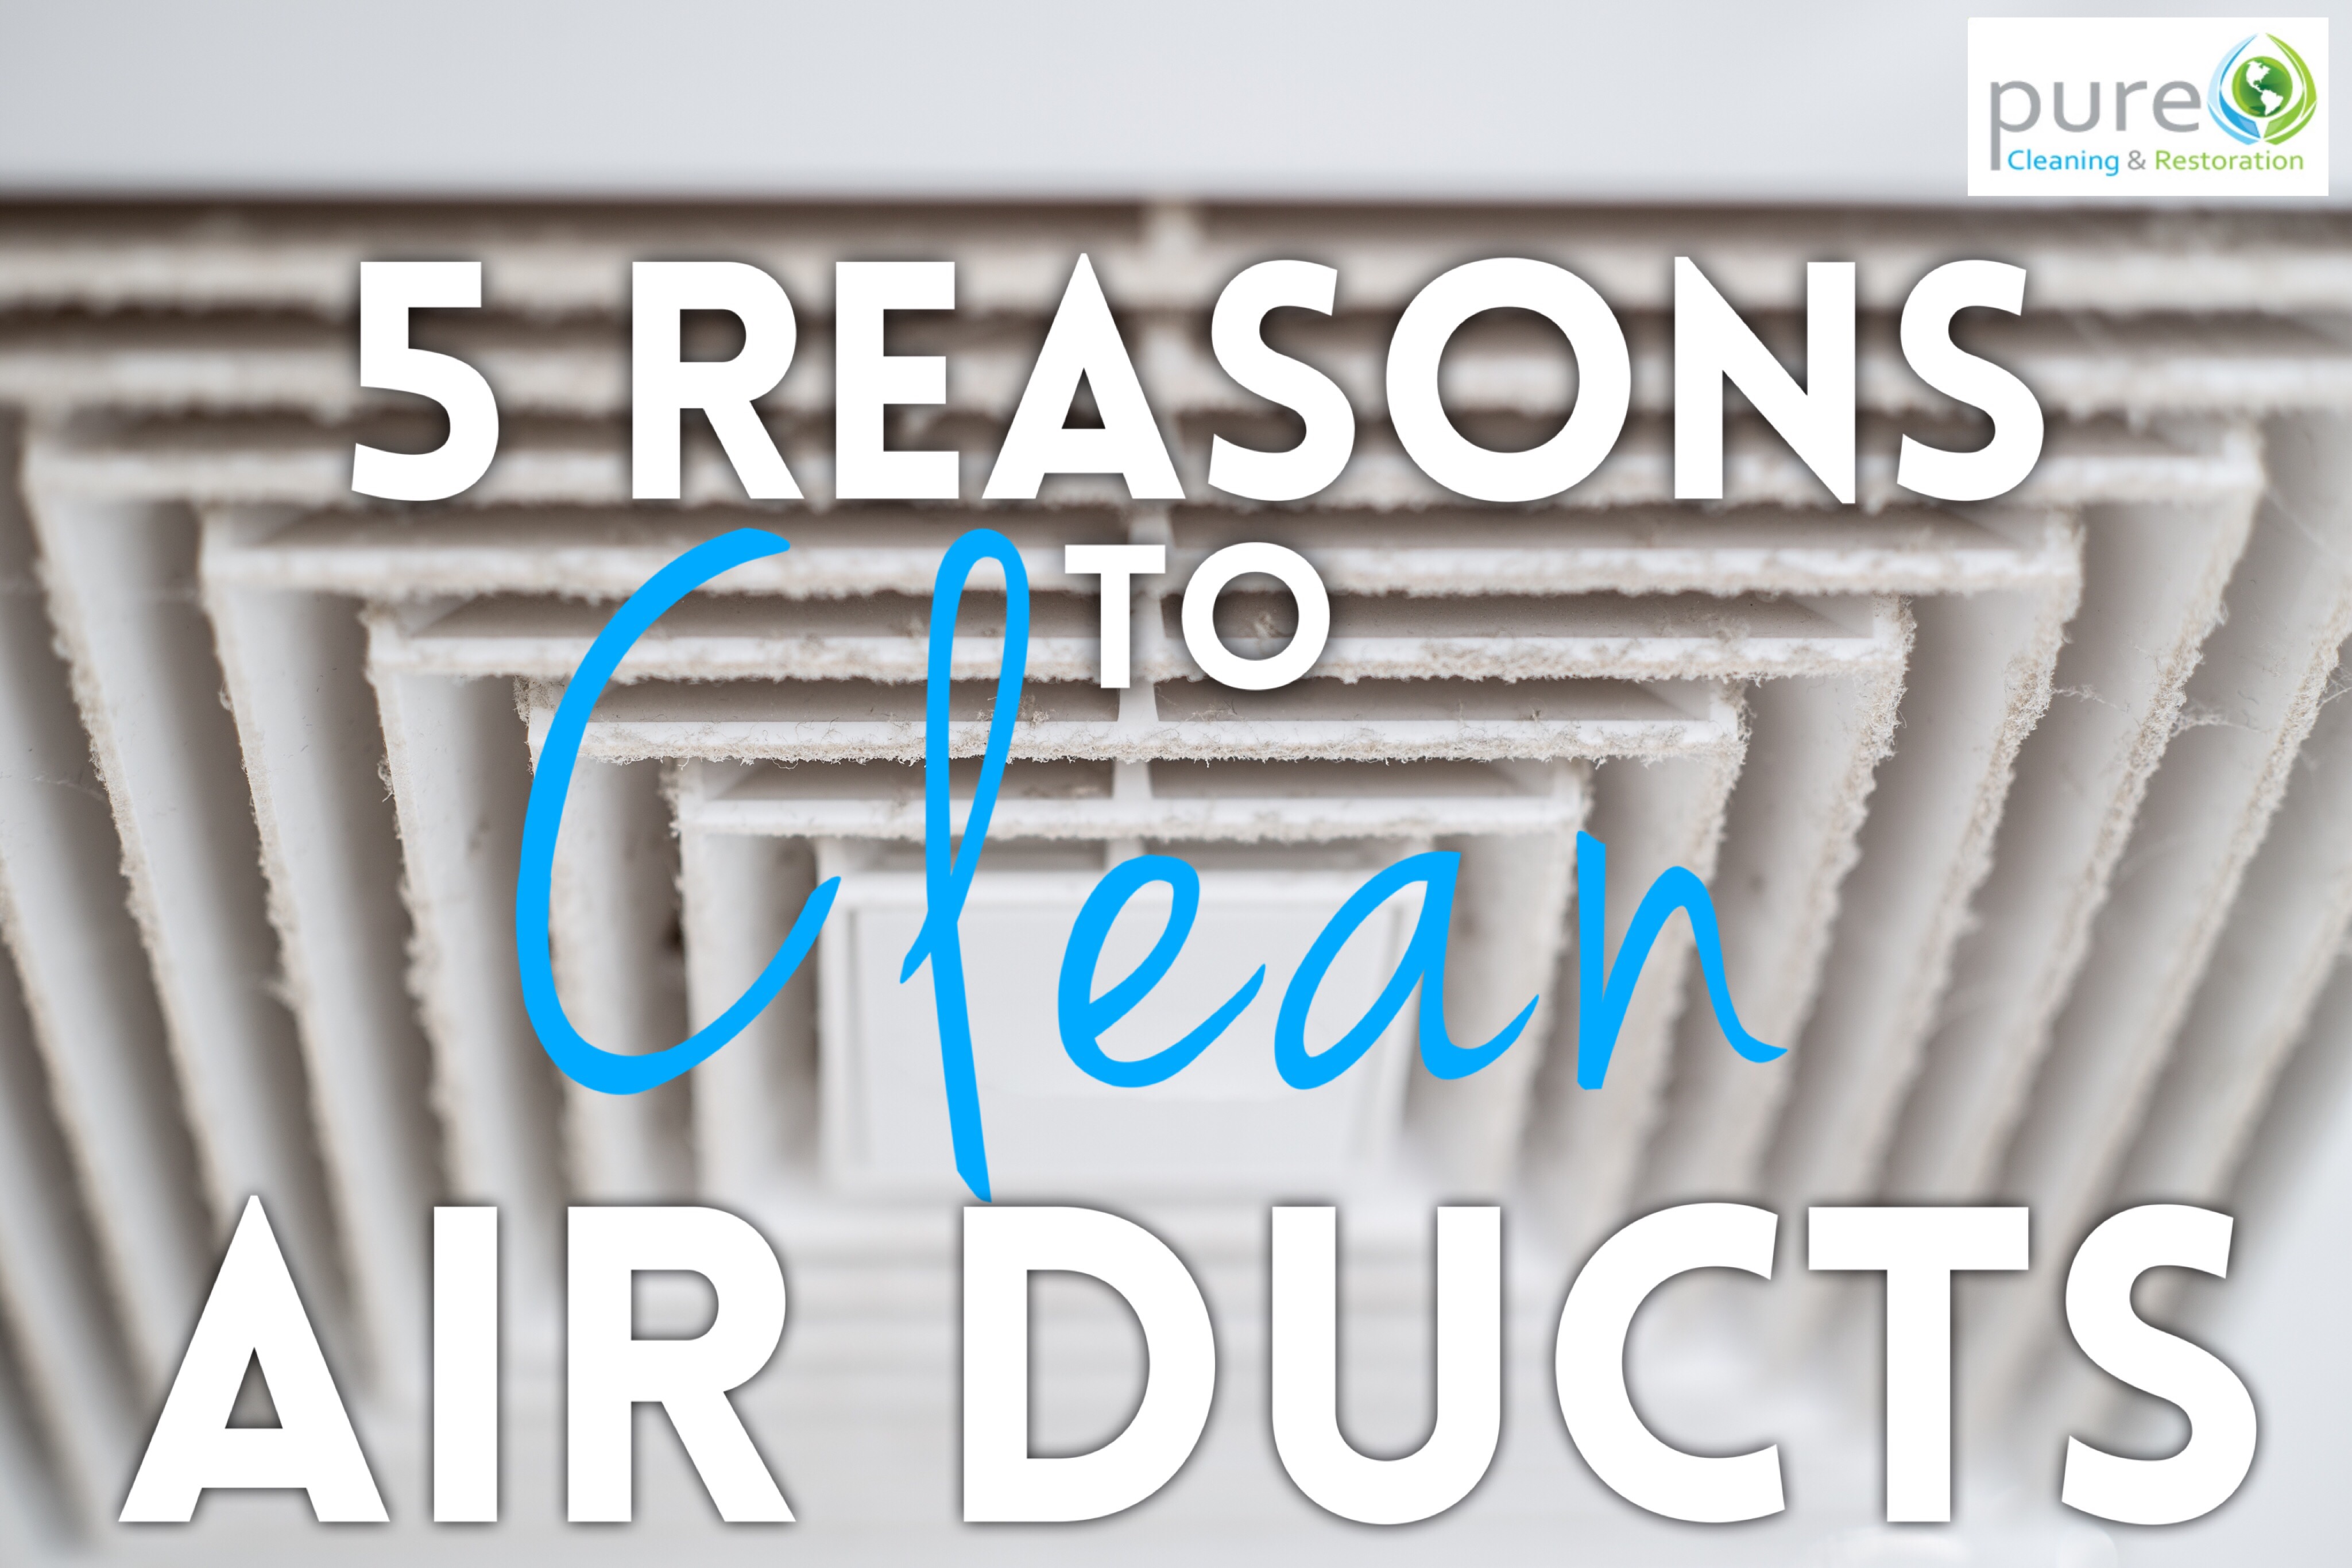 Air Ducts, Clean Air Ducts, Vent cleaning